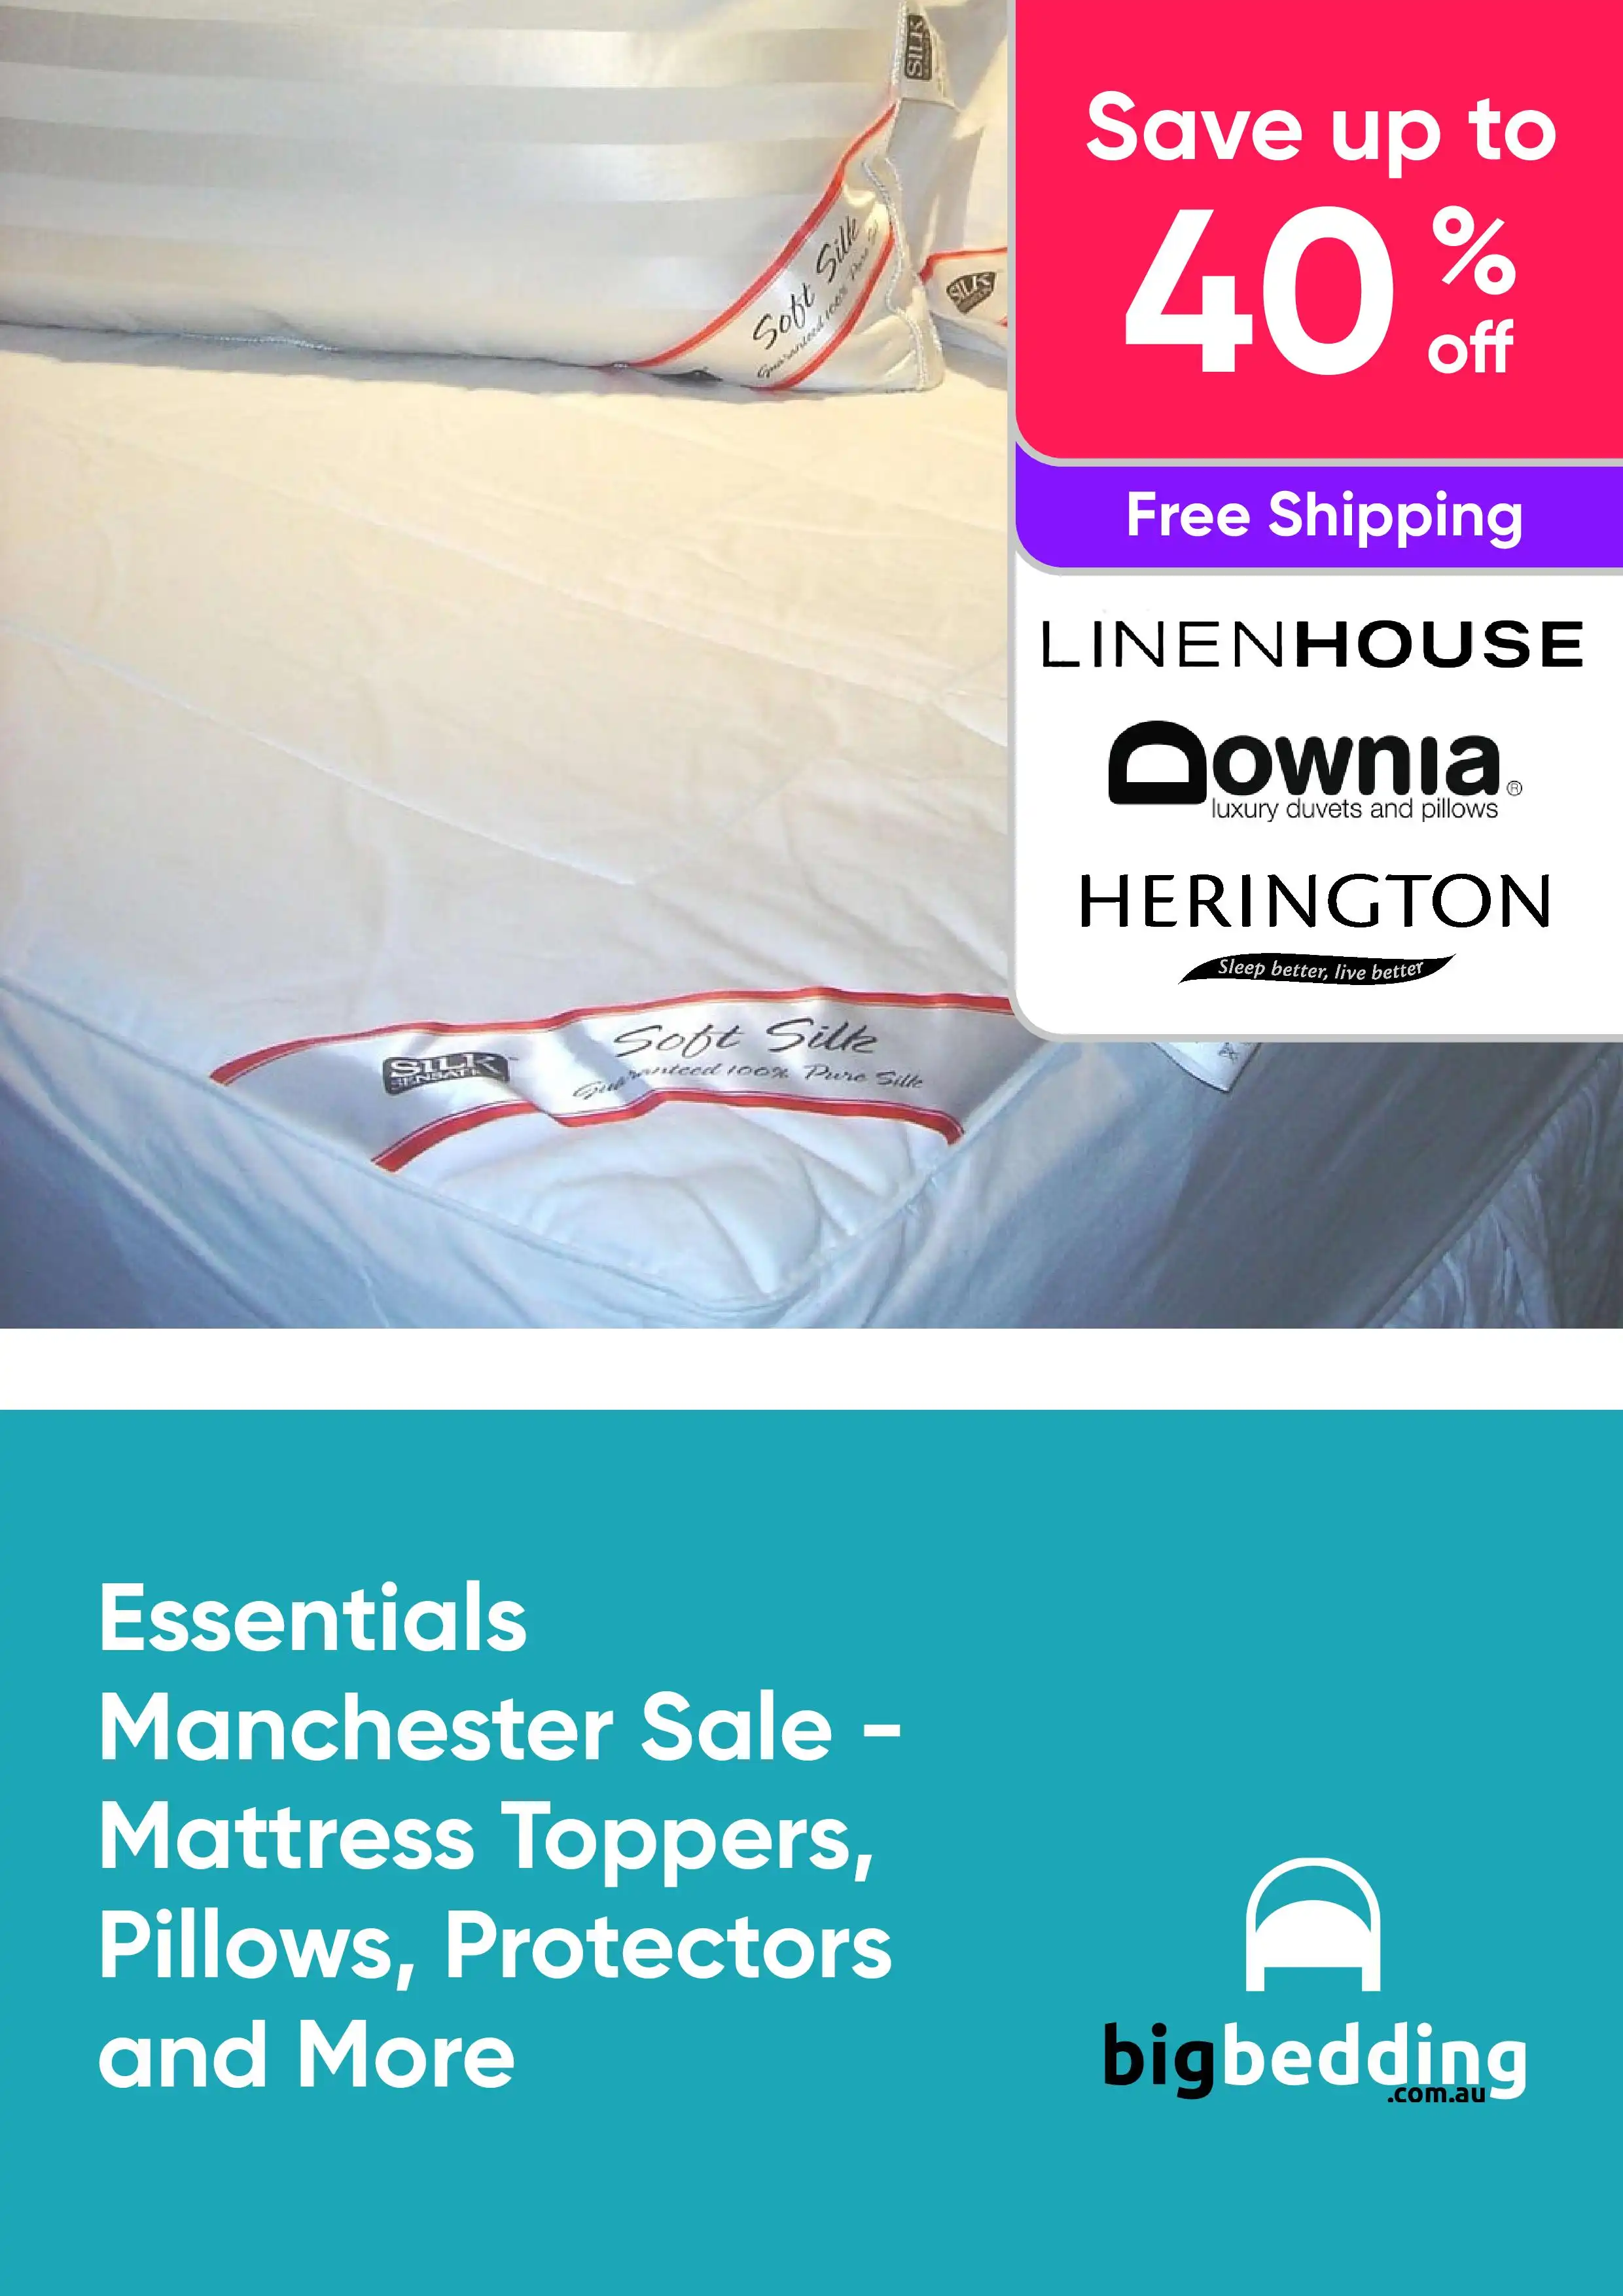 Essentials Manchester Sale - Save up to 40% Off on Mattress Topper, Pillows, Protectors